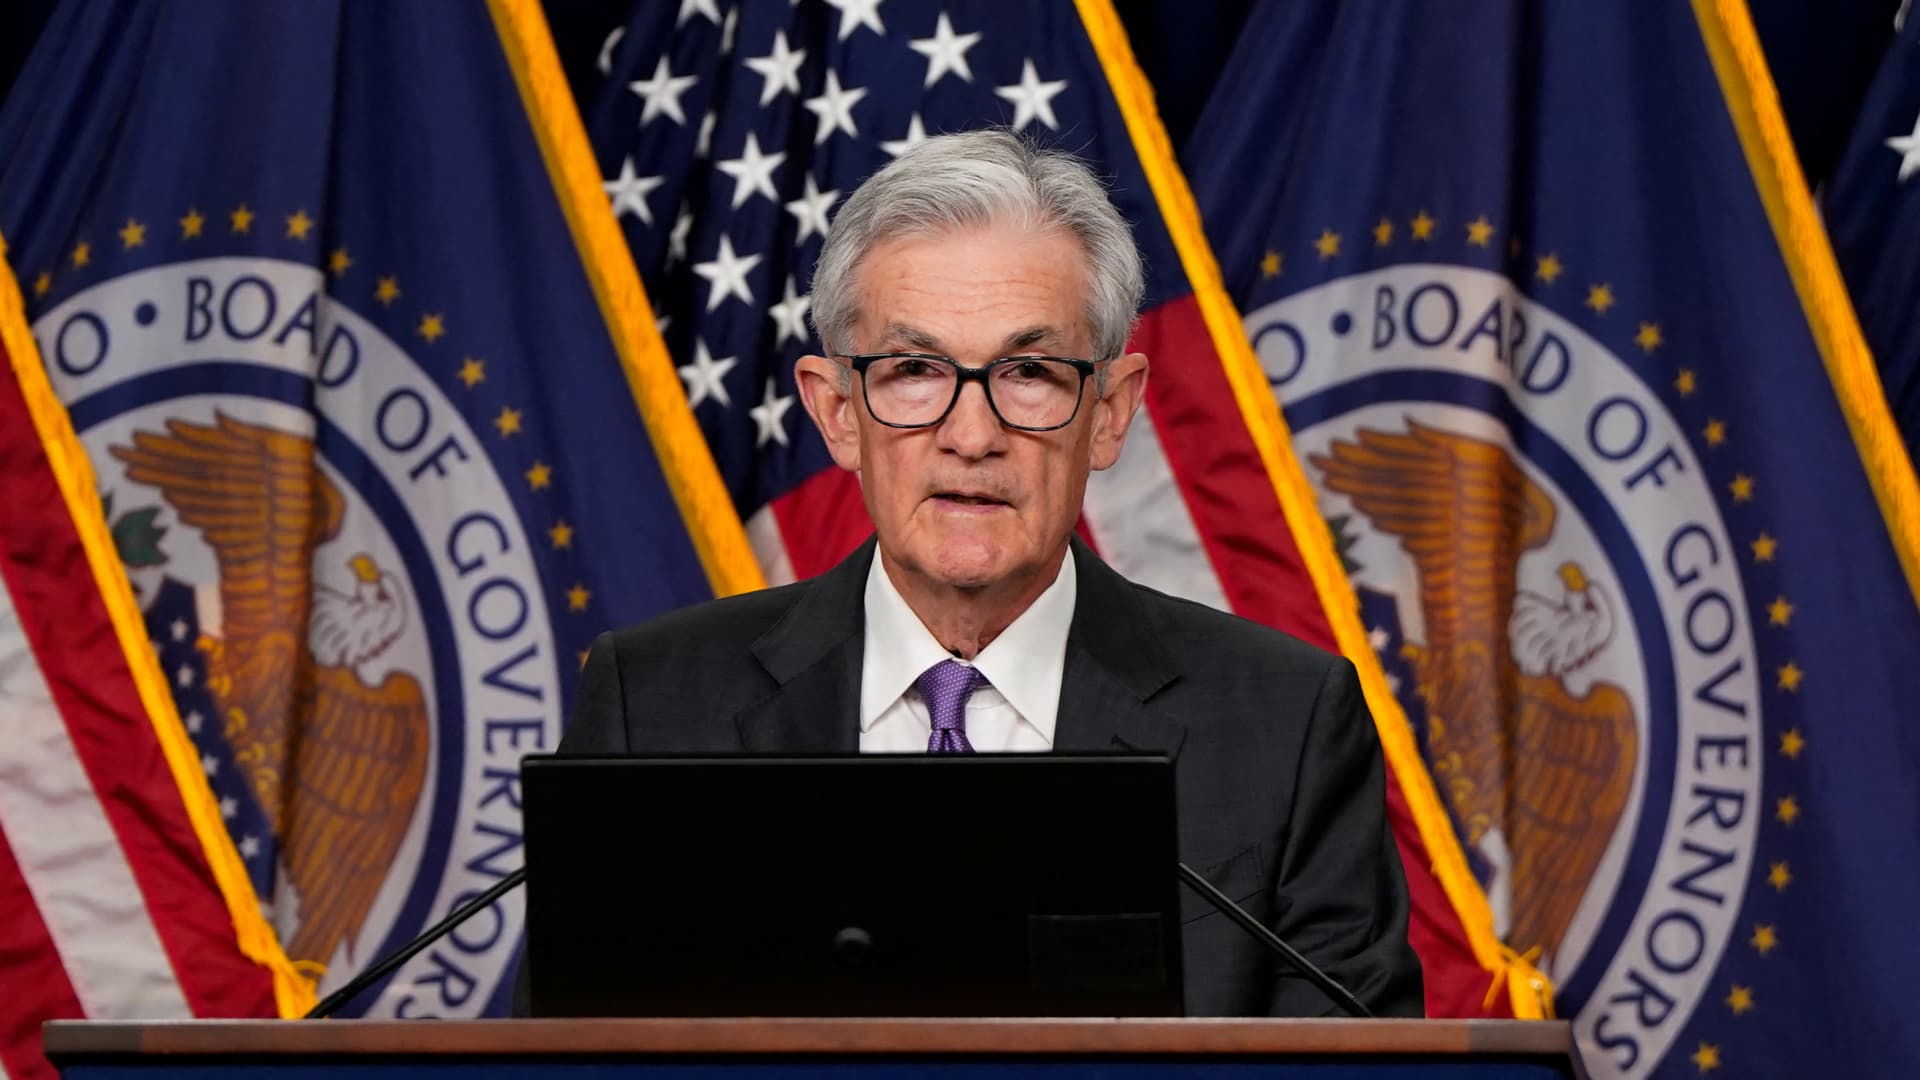 Fed wants more confidence that inflation is moving toward 2% target, meeting minutes indicate